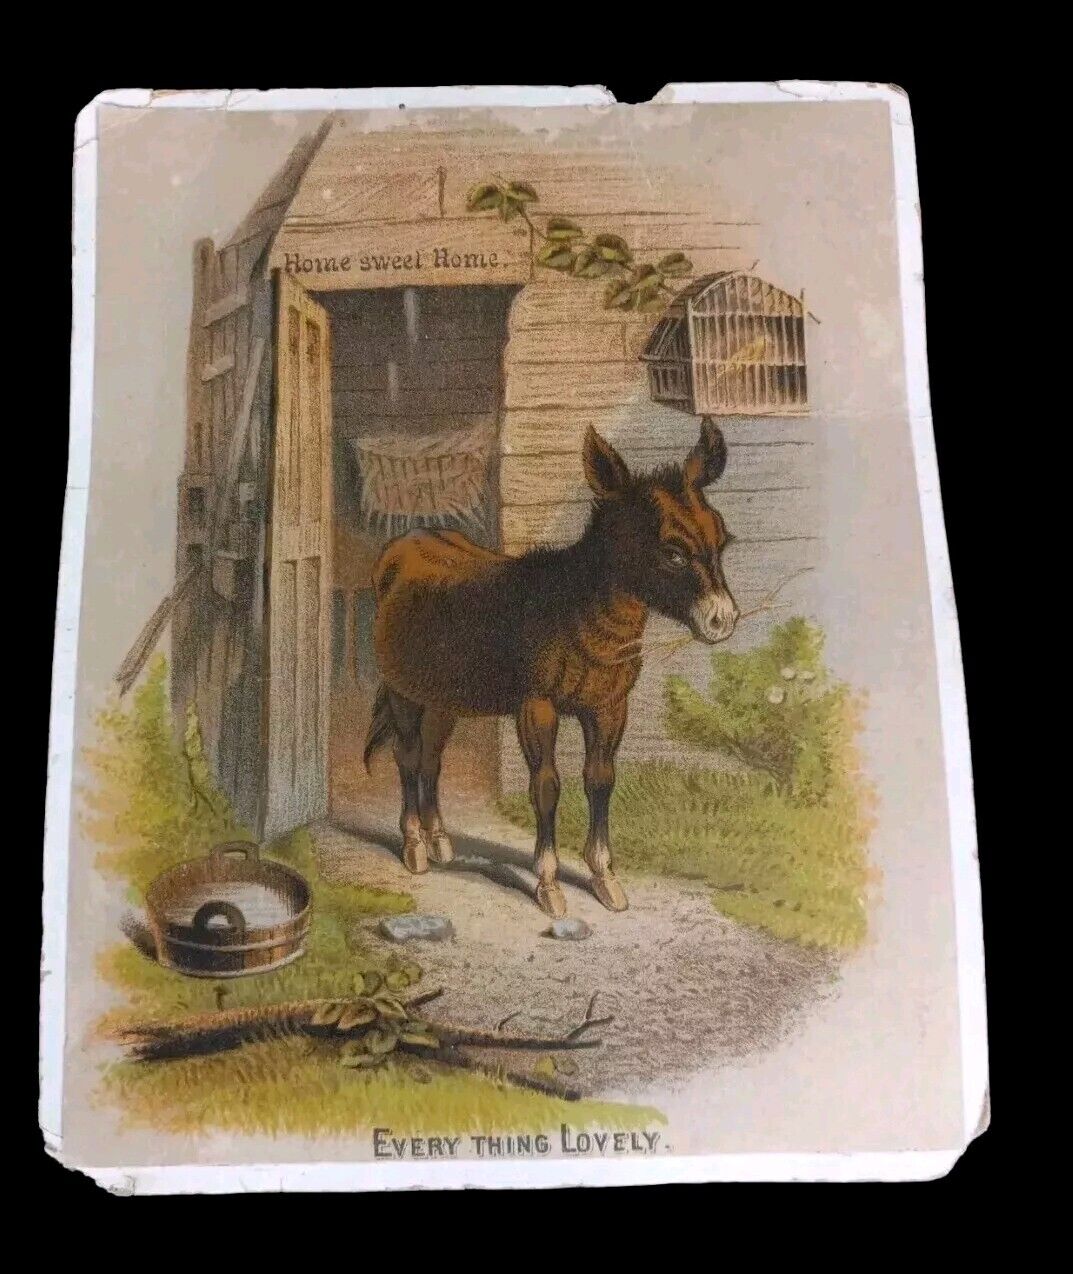 2 DONKEY 1800s Victorian Buffords Trade Cards HOME SWEET HOME 